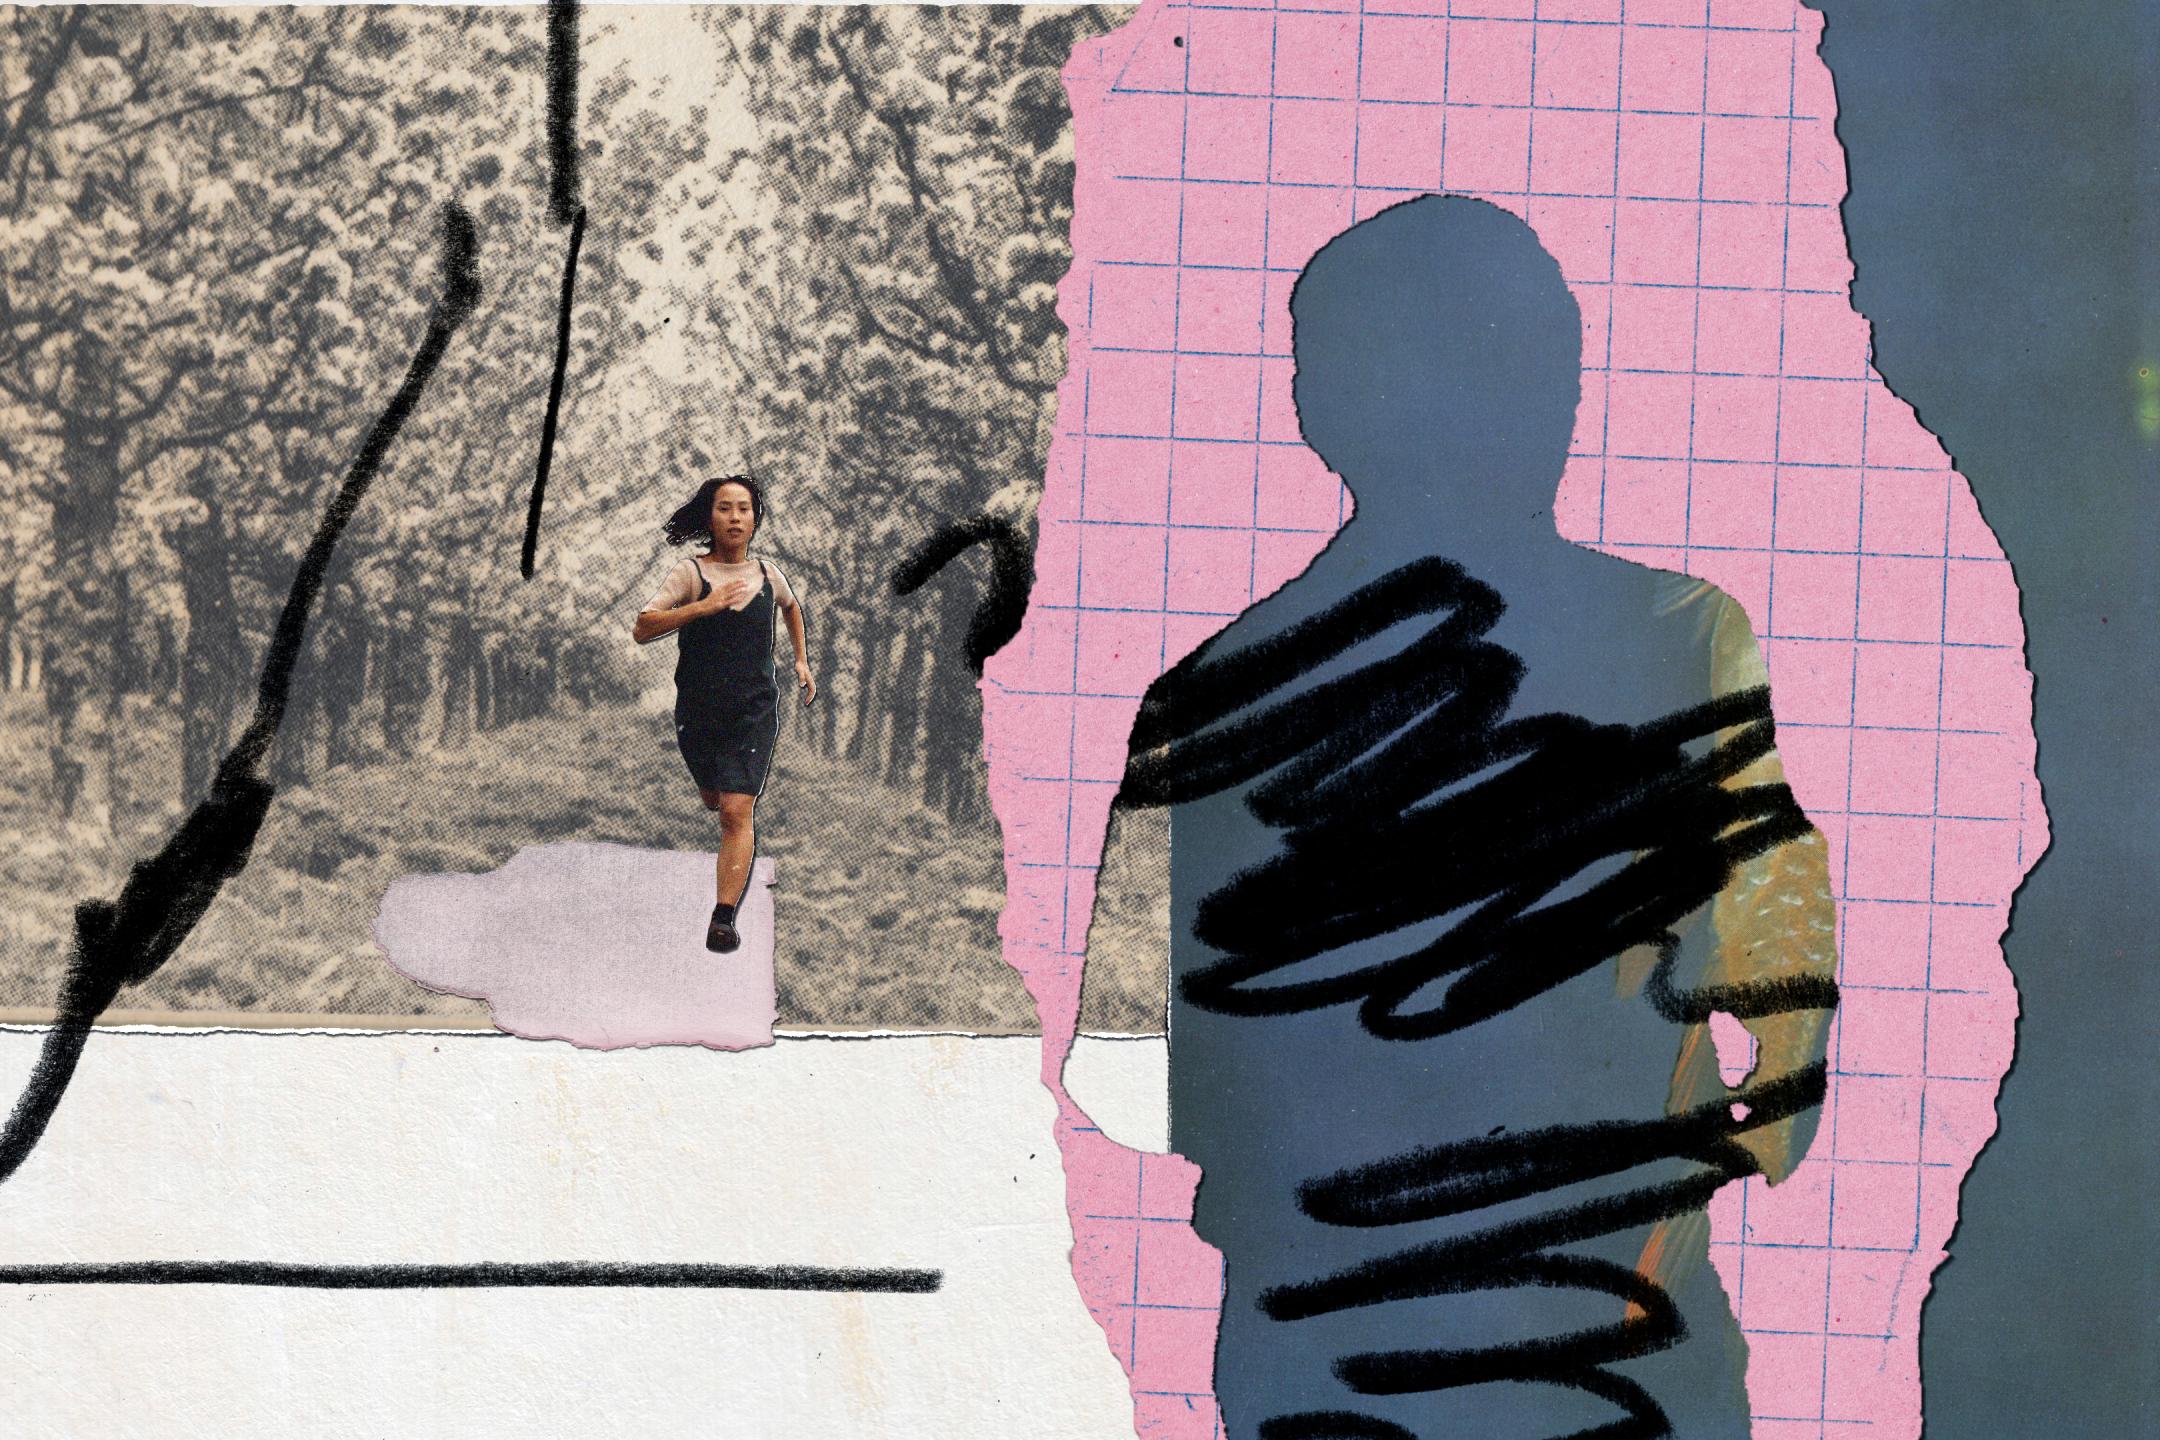 Splitter collage: Left a photo of a young woman running towards the camera, right the illustration of the outlines of a male person.